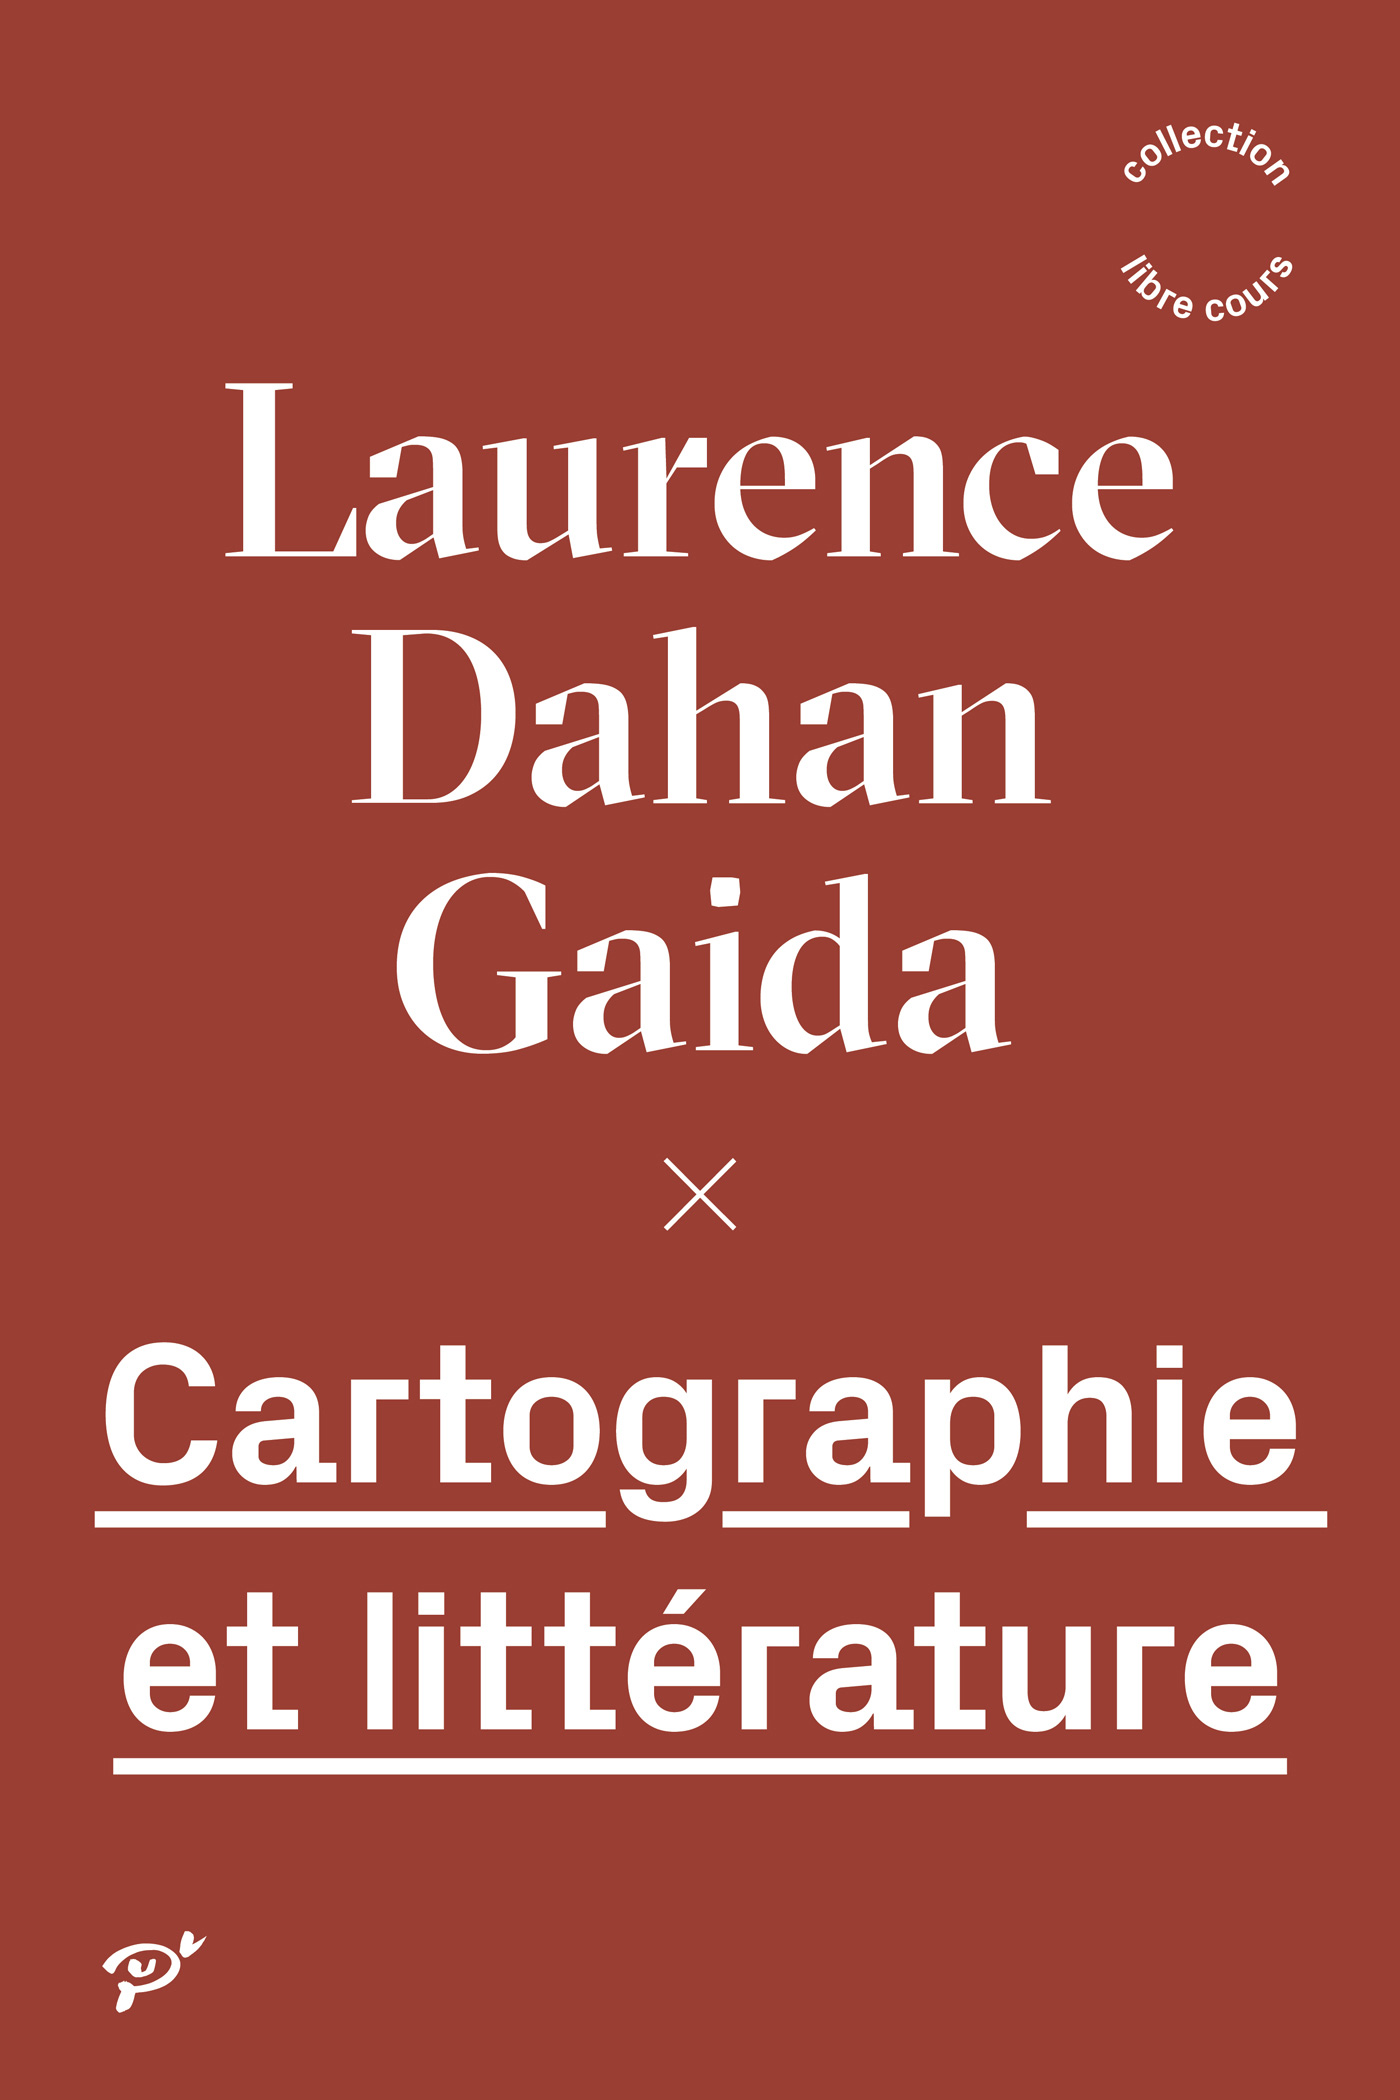 You are currently viewing Cartographie et littérature